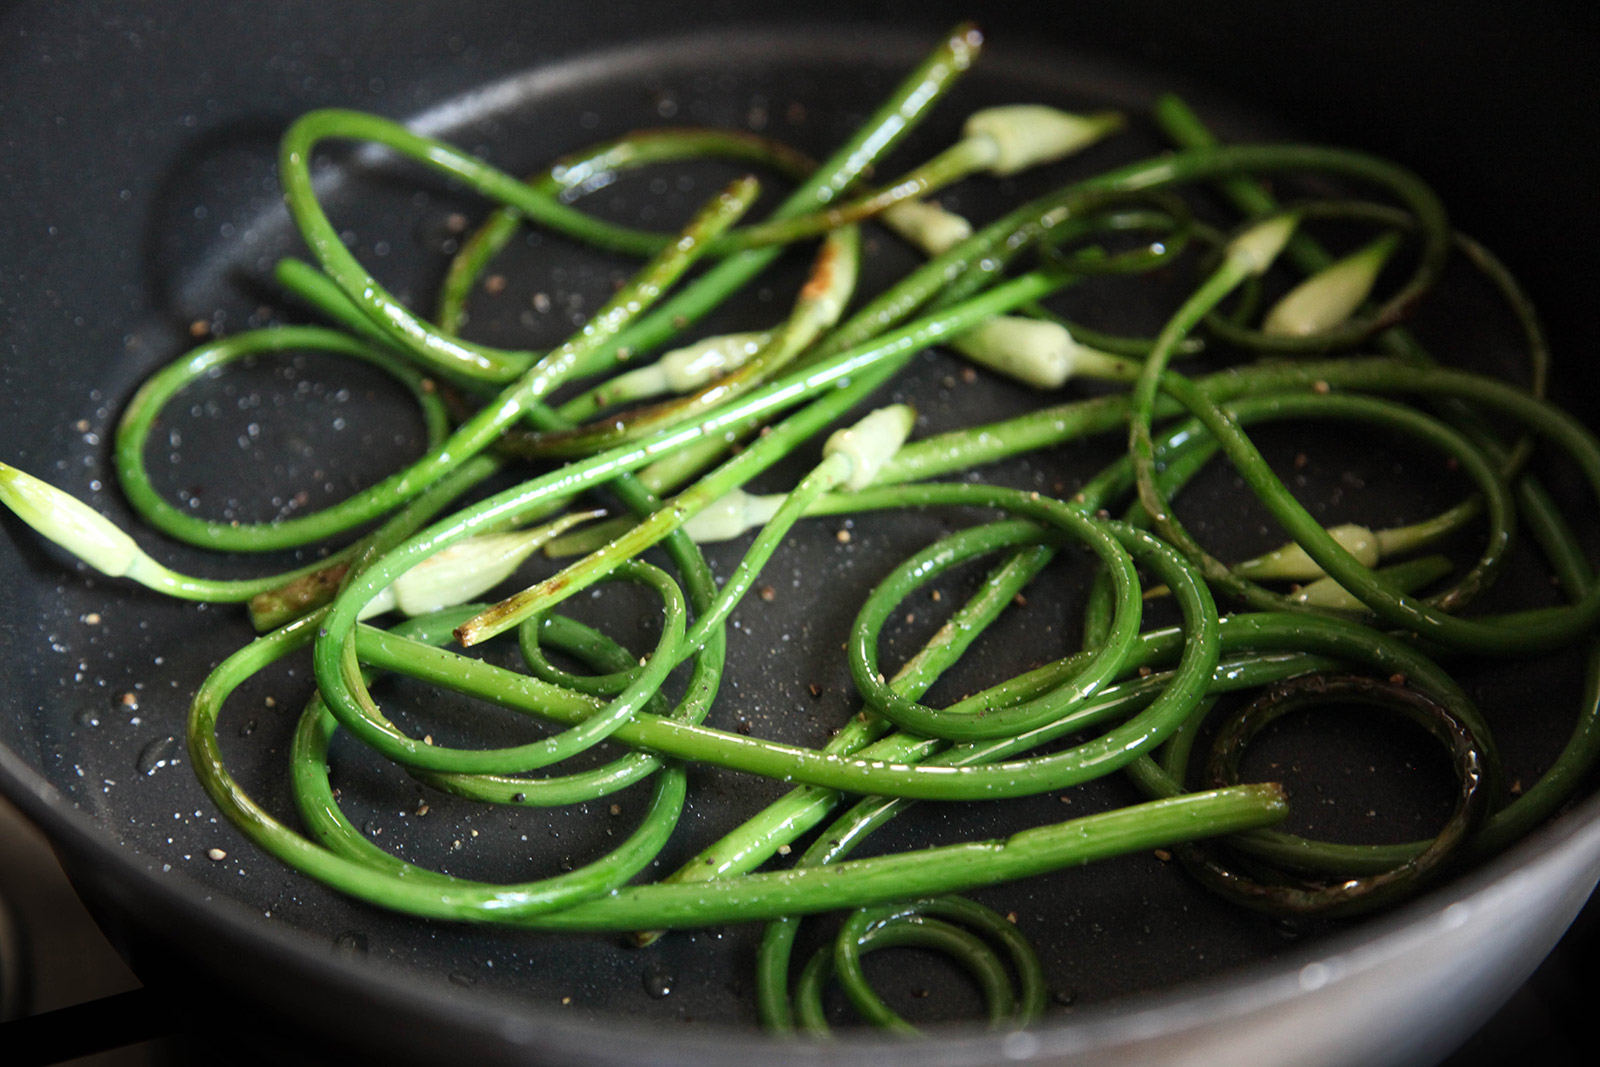 Sauteeing Garlic Scapes with Olive Oil, Sea Salt & Freshly Ground Pepper